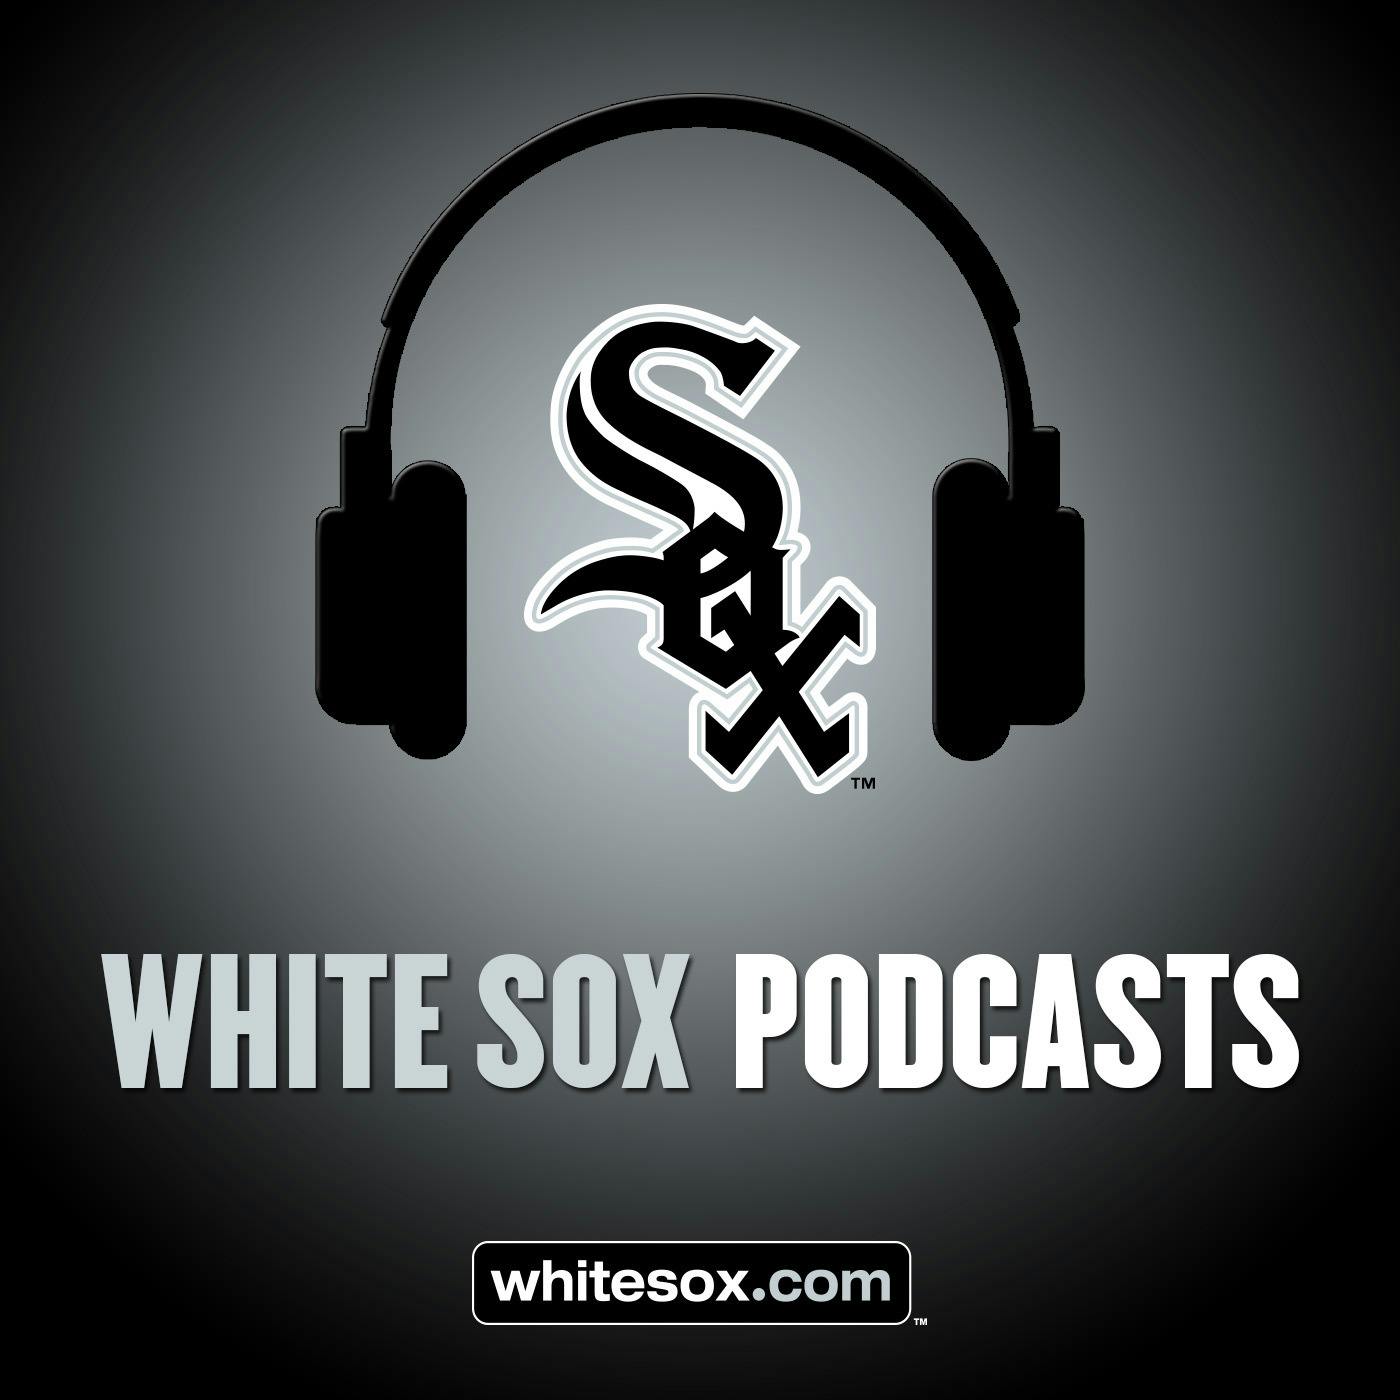 11/24/18: White Sox Weekly